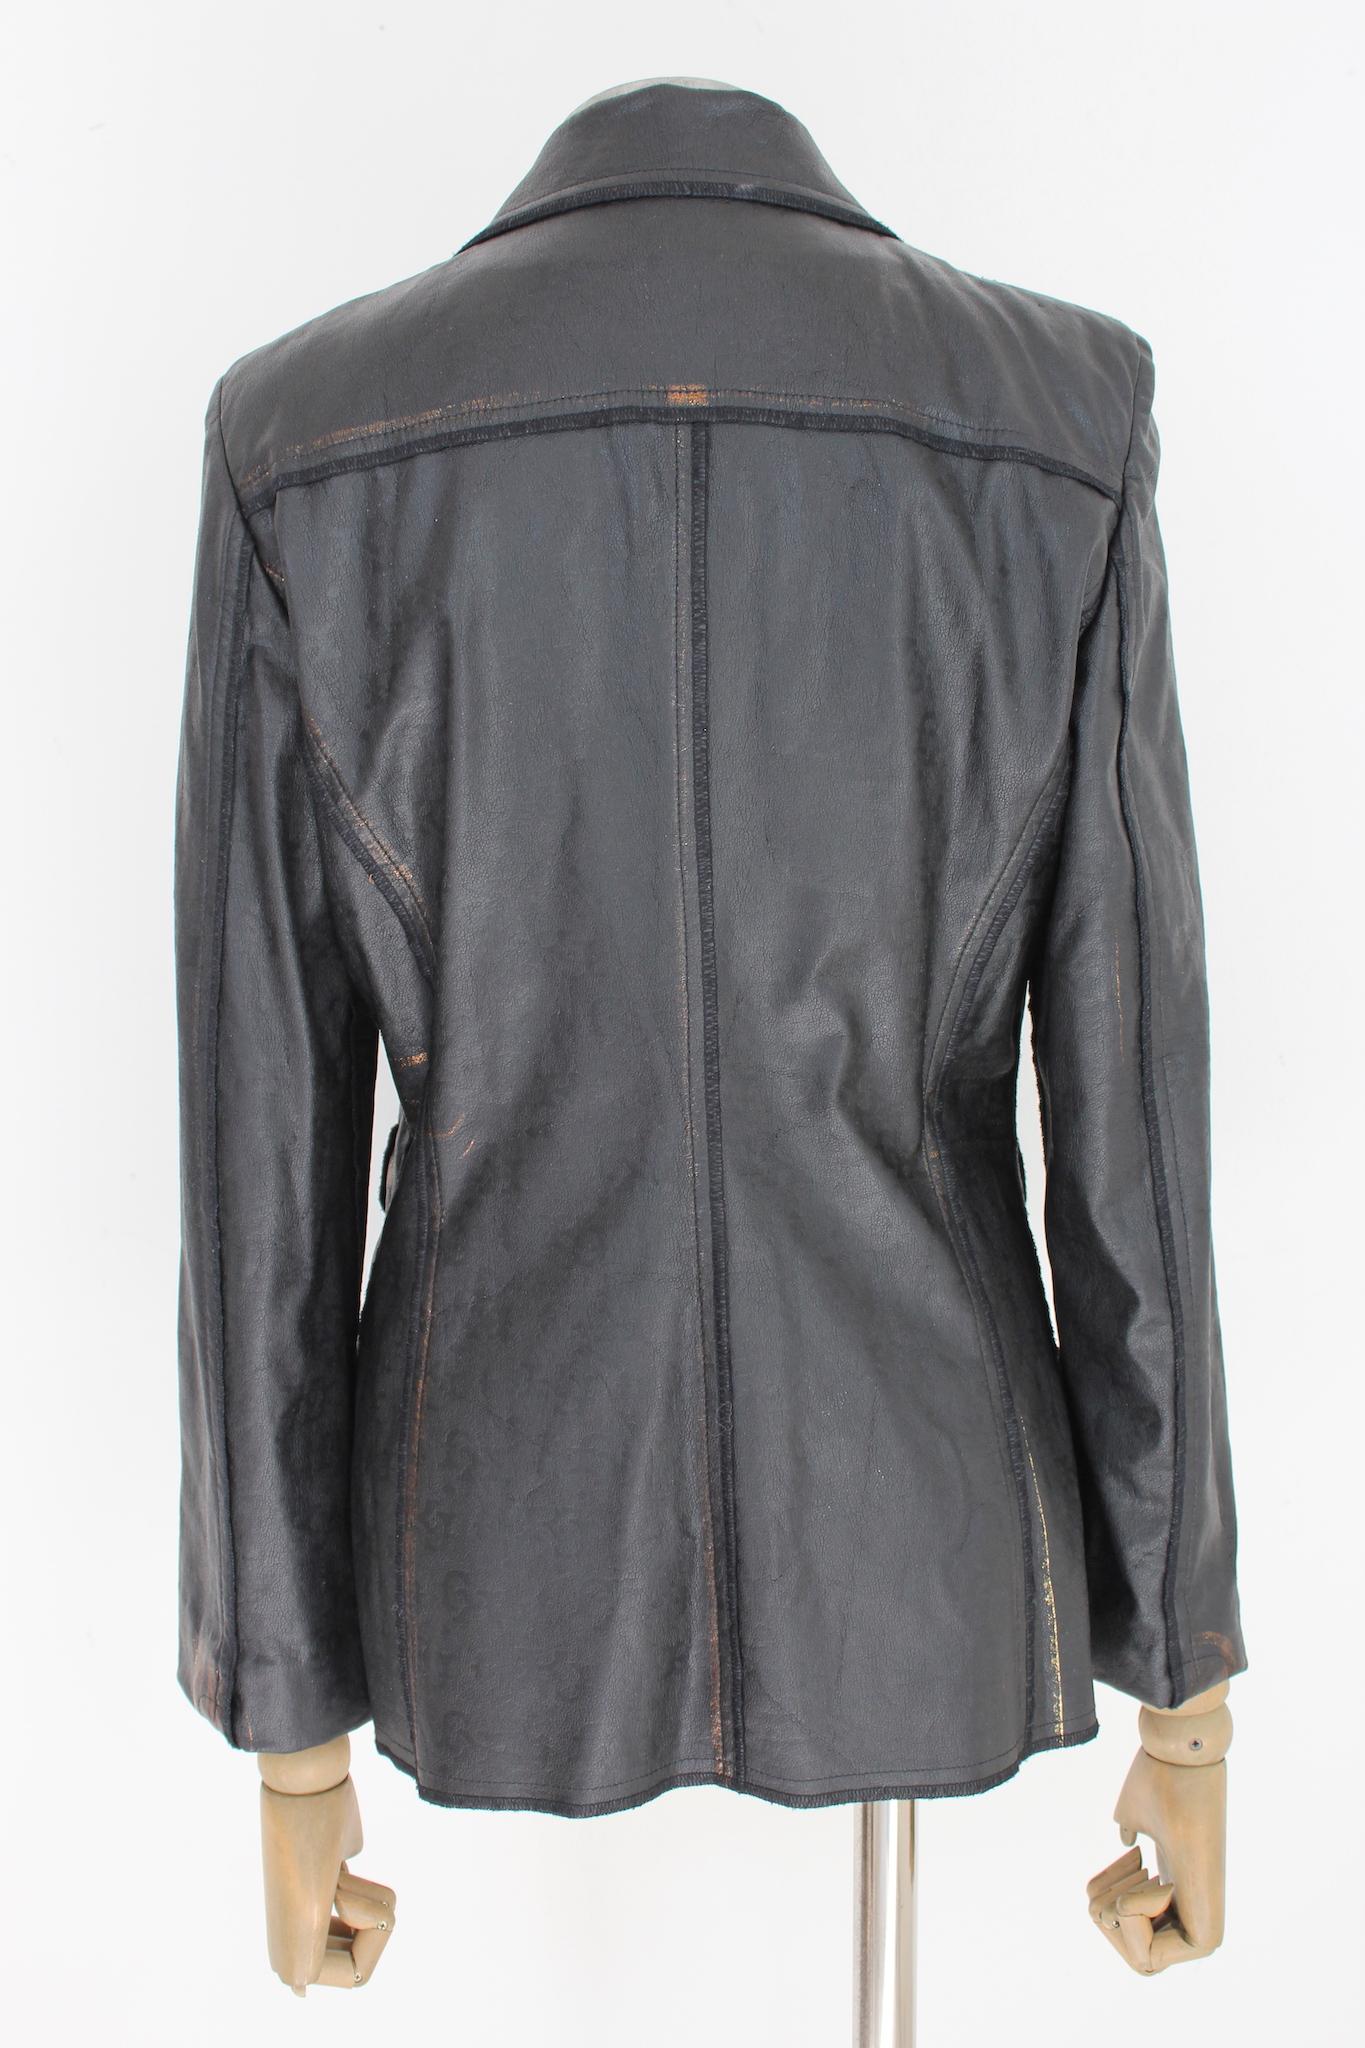 Kenzo vintage 80s faux leather flared jacket. Soft jacket, black with bronze shades, hidden clip buttons. Fabric 50% cotton, 50% polyurethane, internally unlined. Made in Italy.

Size: 40 It 6 Us 8 Uk

Shoulder: 40 cm
Bust/Chest: 46 cm
Sleeve: 58